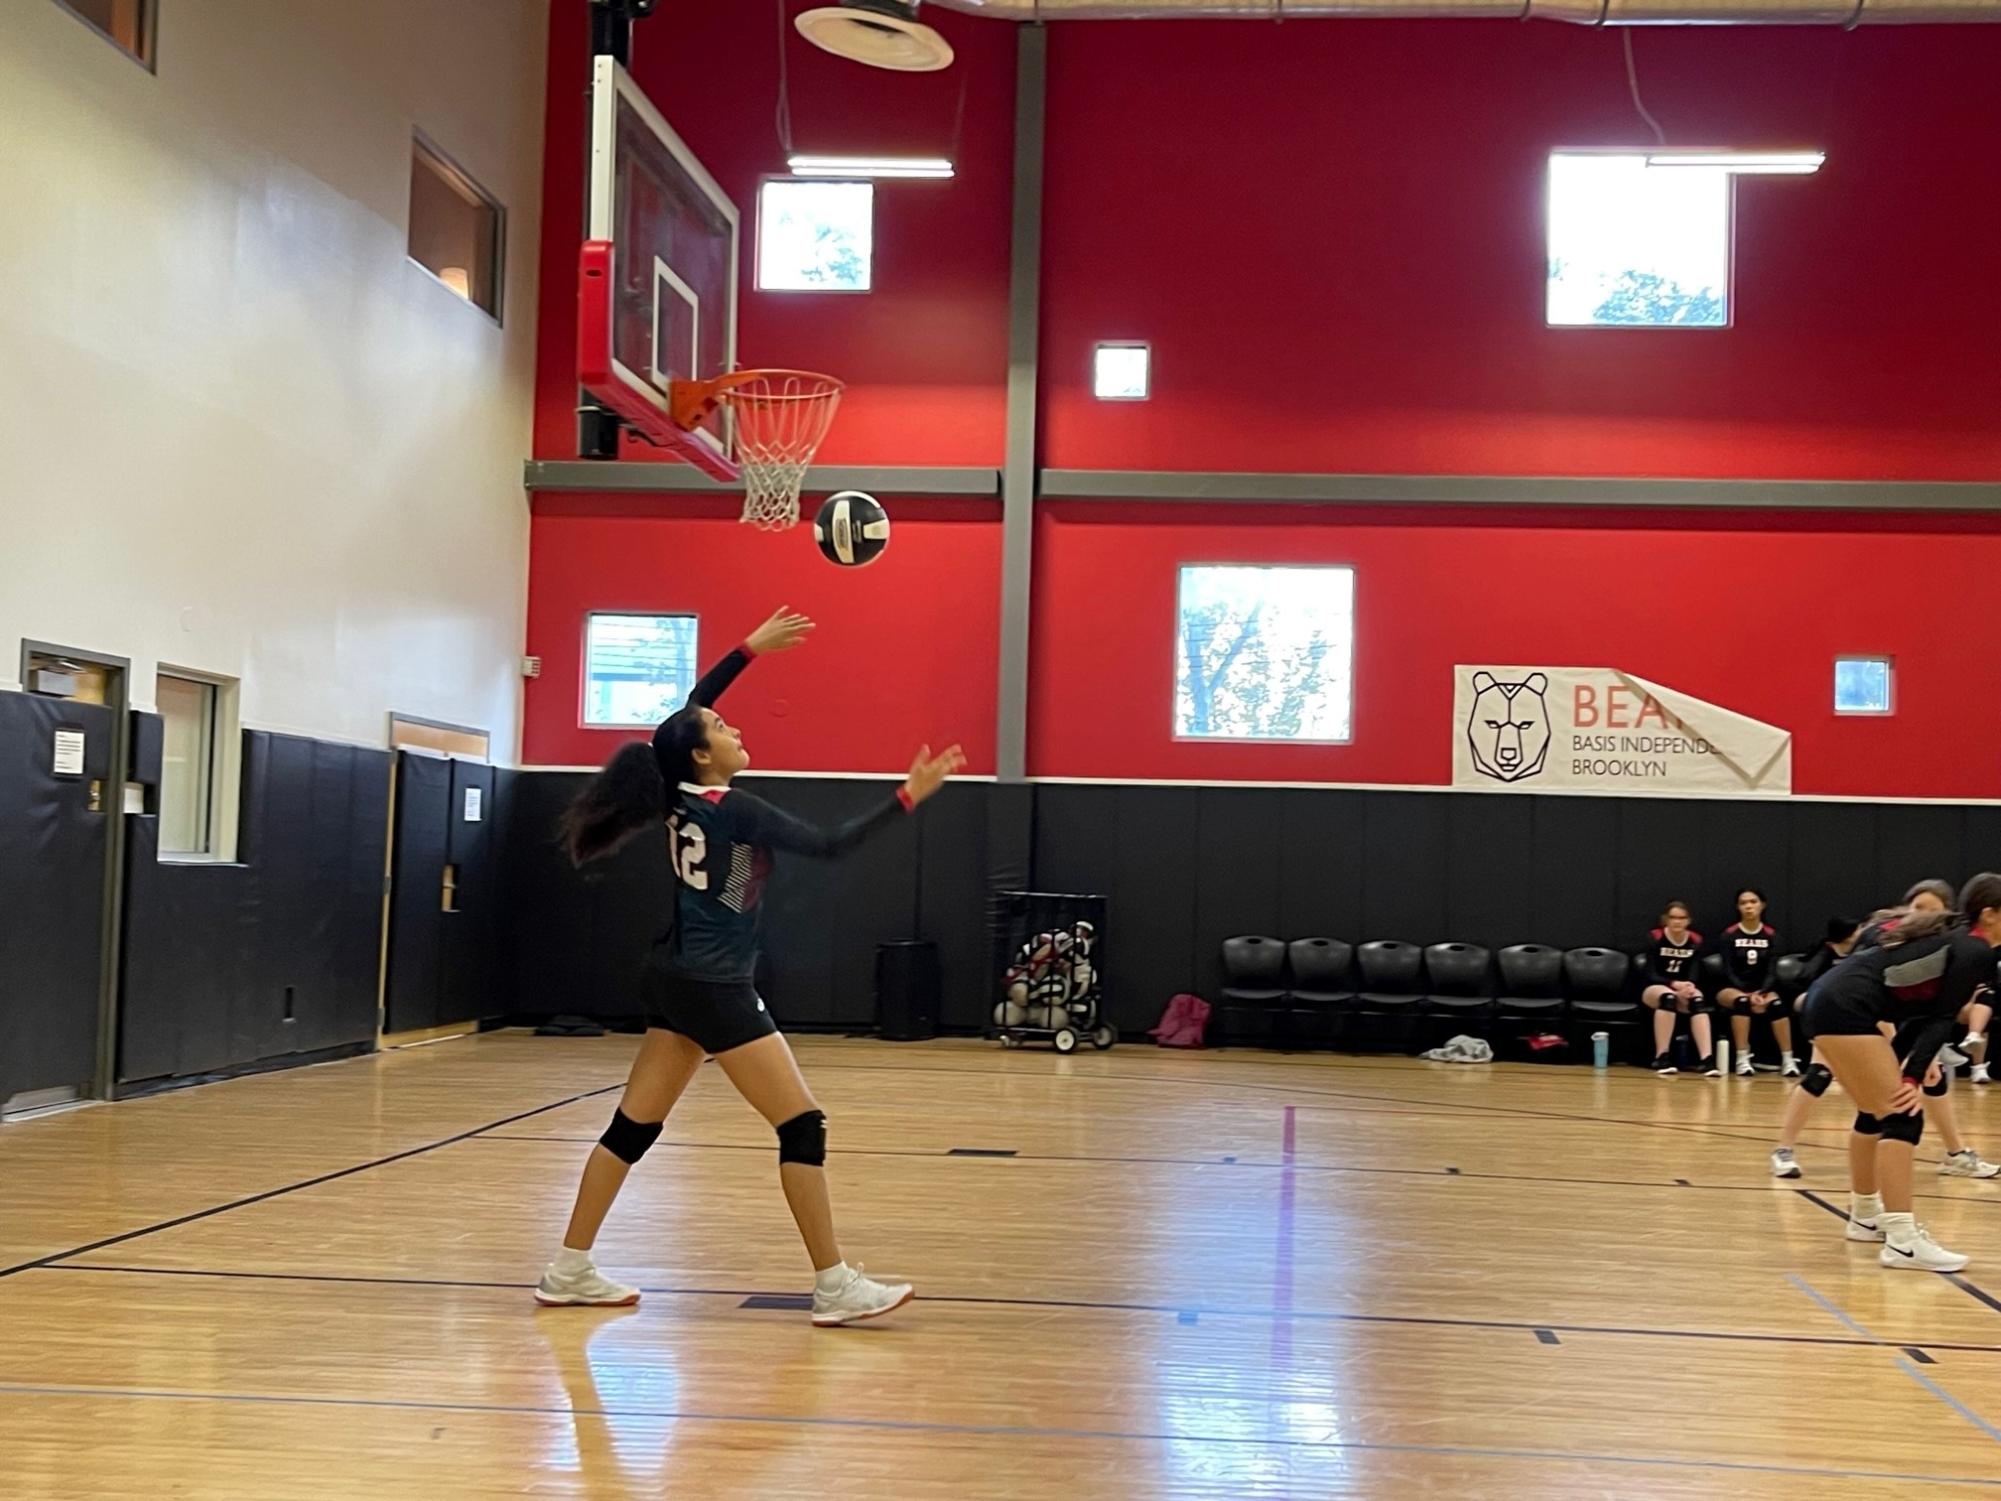 Dalya B.s smooth overhead serve made the difference.